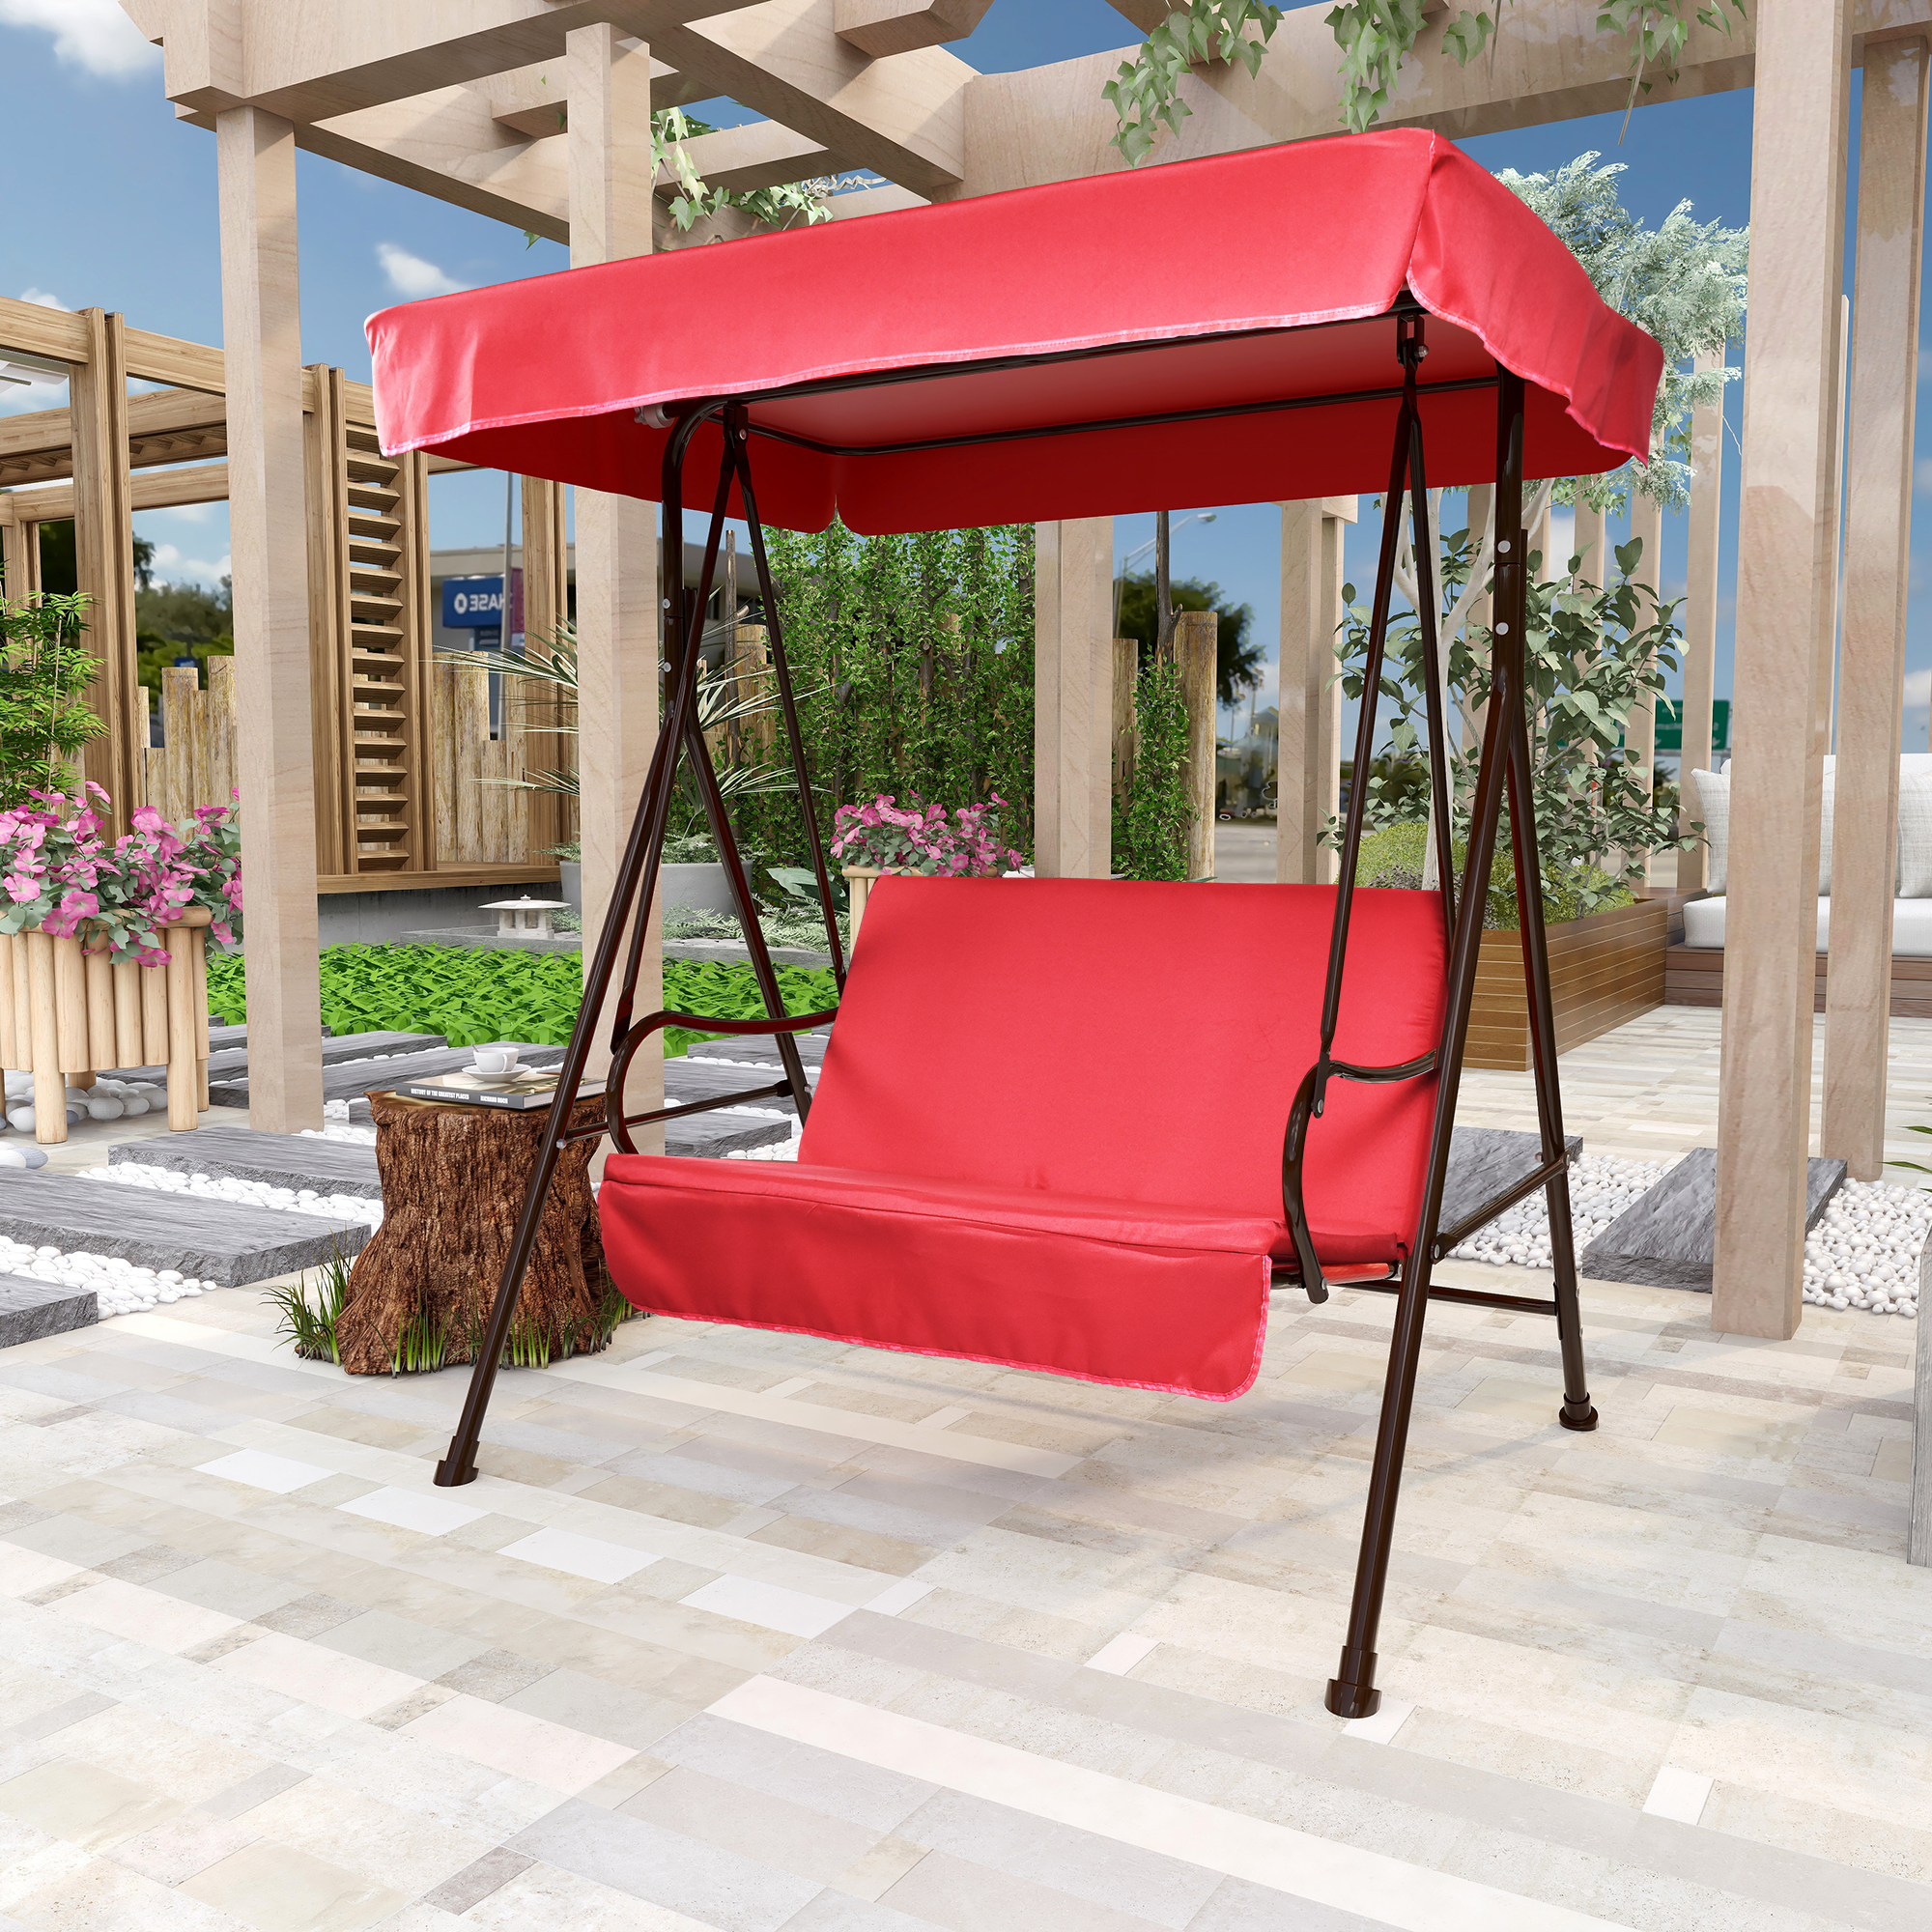 2-Seat Outdoor Patio Porch Swing Chair, Porch Lawn Swing With Removable Cushion And Convertible Canopy, Brown Red-Boyel Living